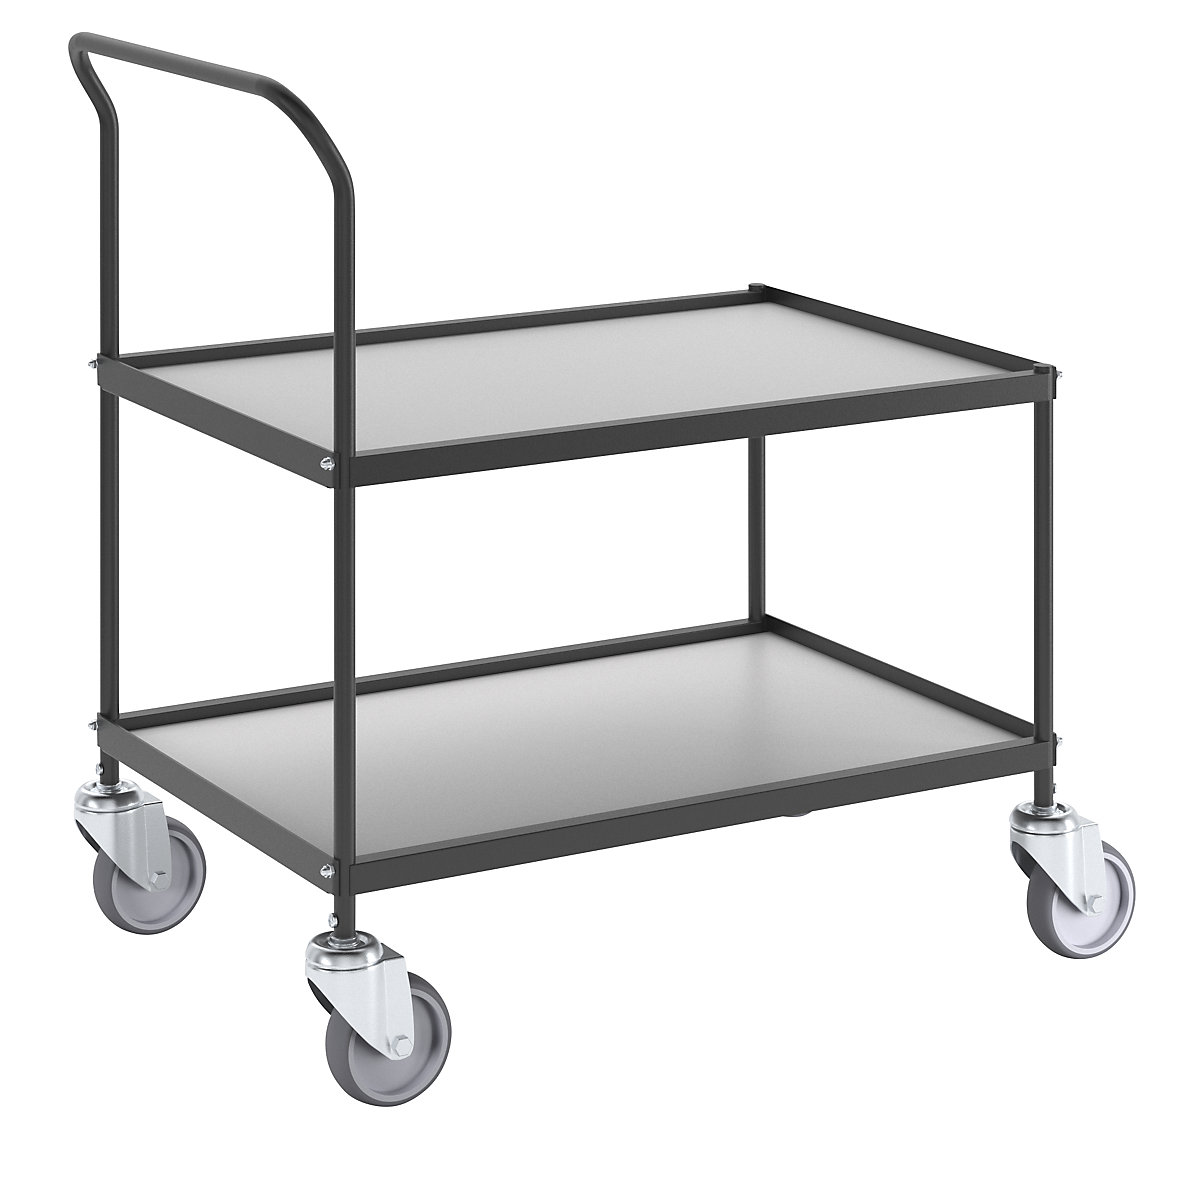 Serving and clearing trolley, 2 shelves, LxWxH 830 x 545 x 920 mm-1